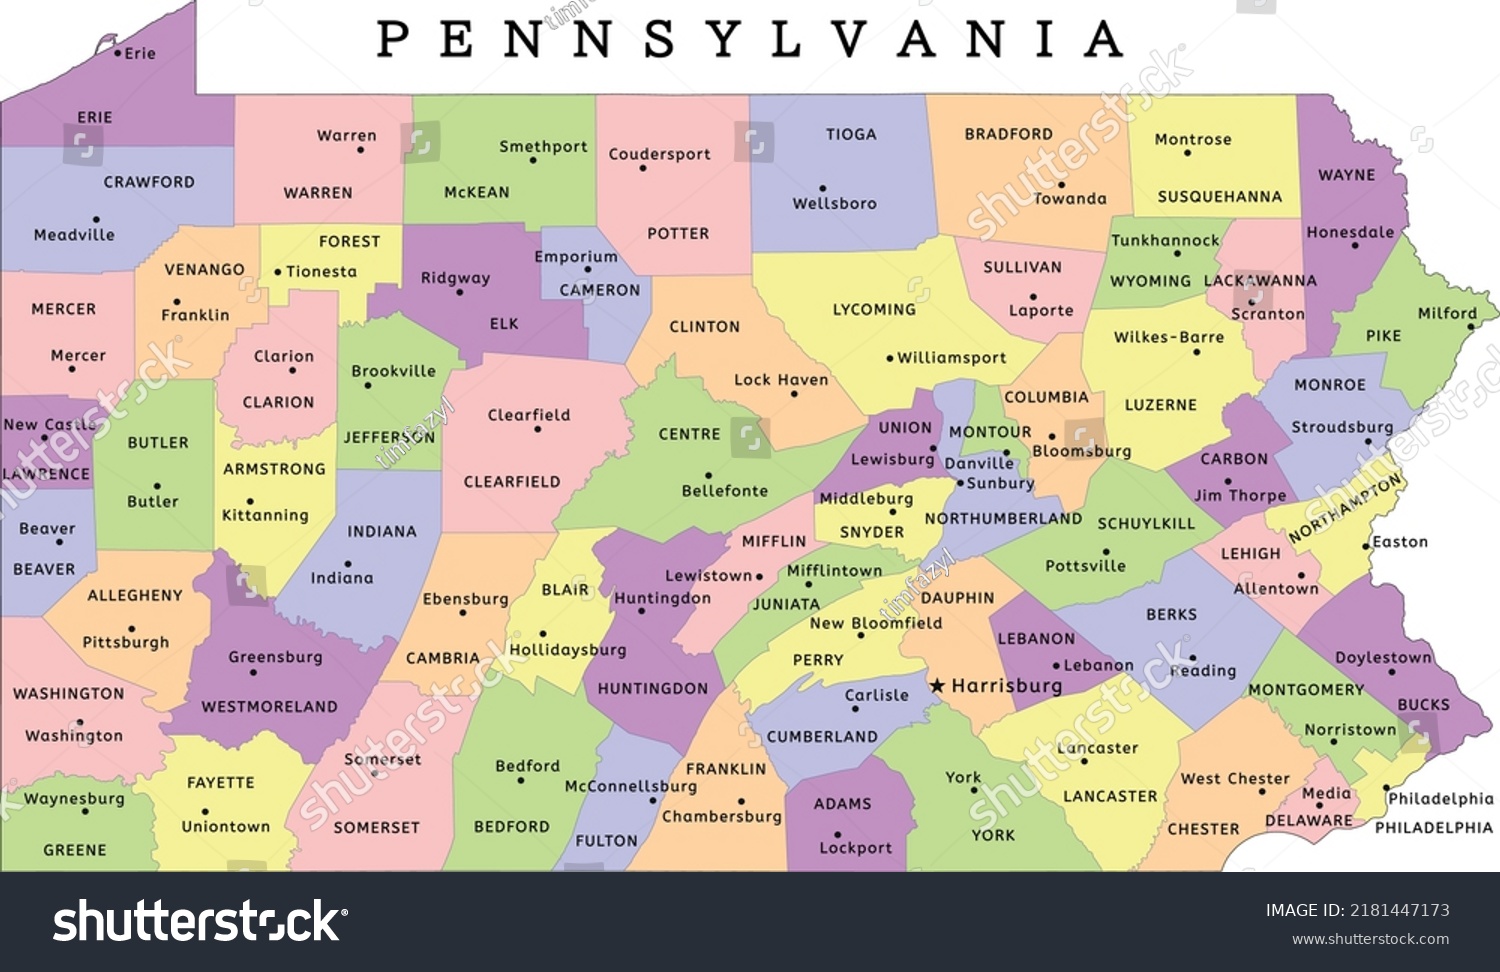 118 Colorful lackawanna Images, Stock Photos & Vectors | Shutterstock